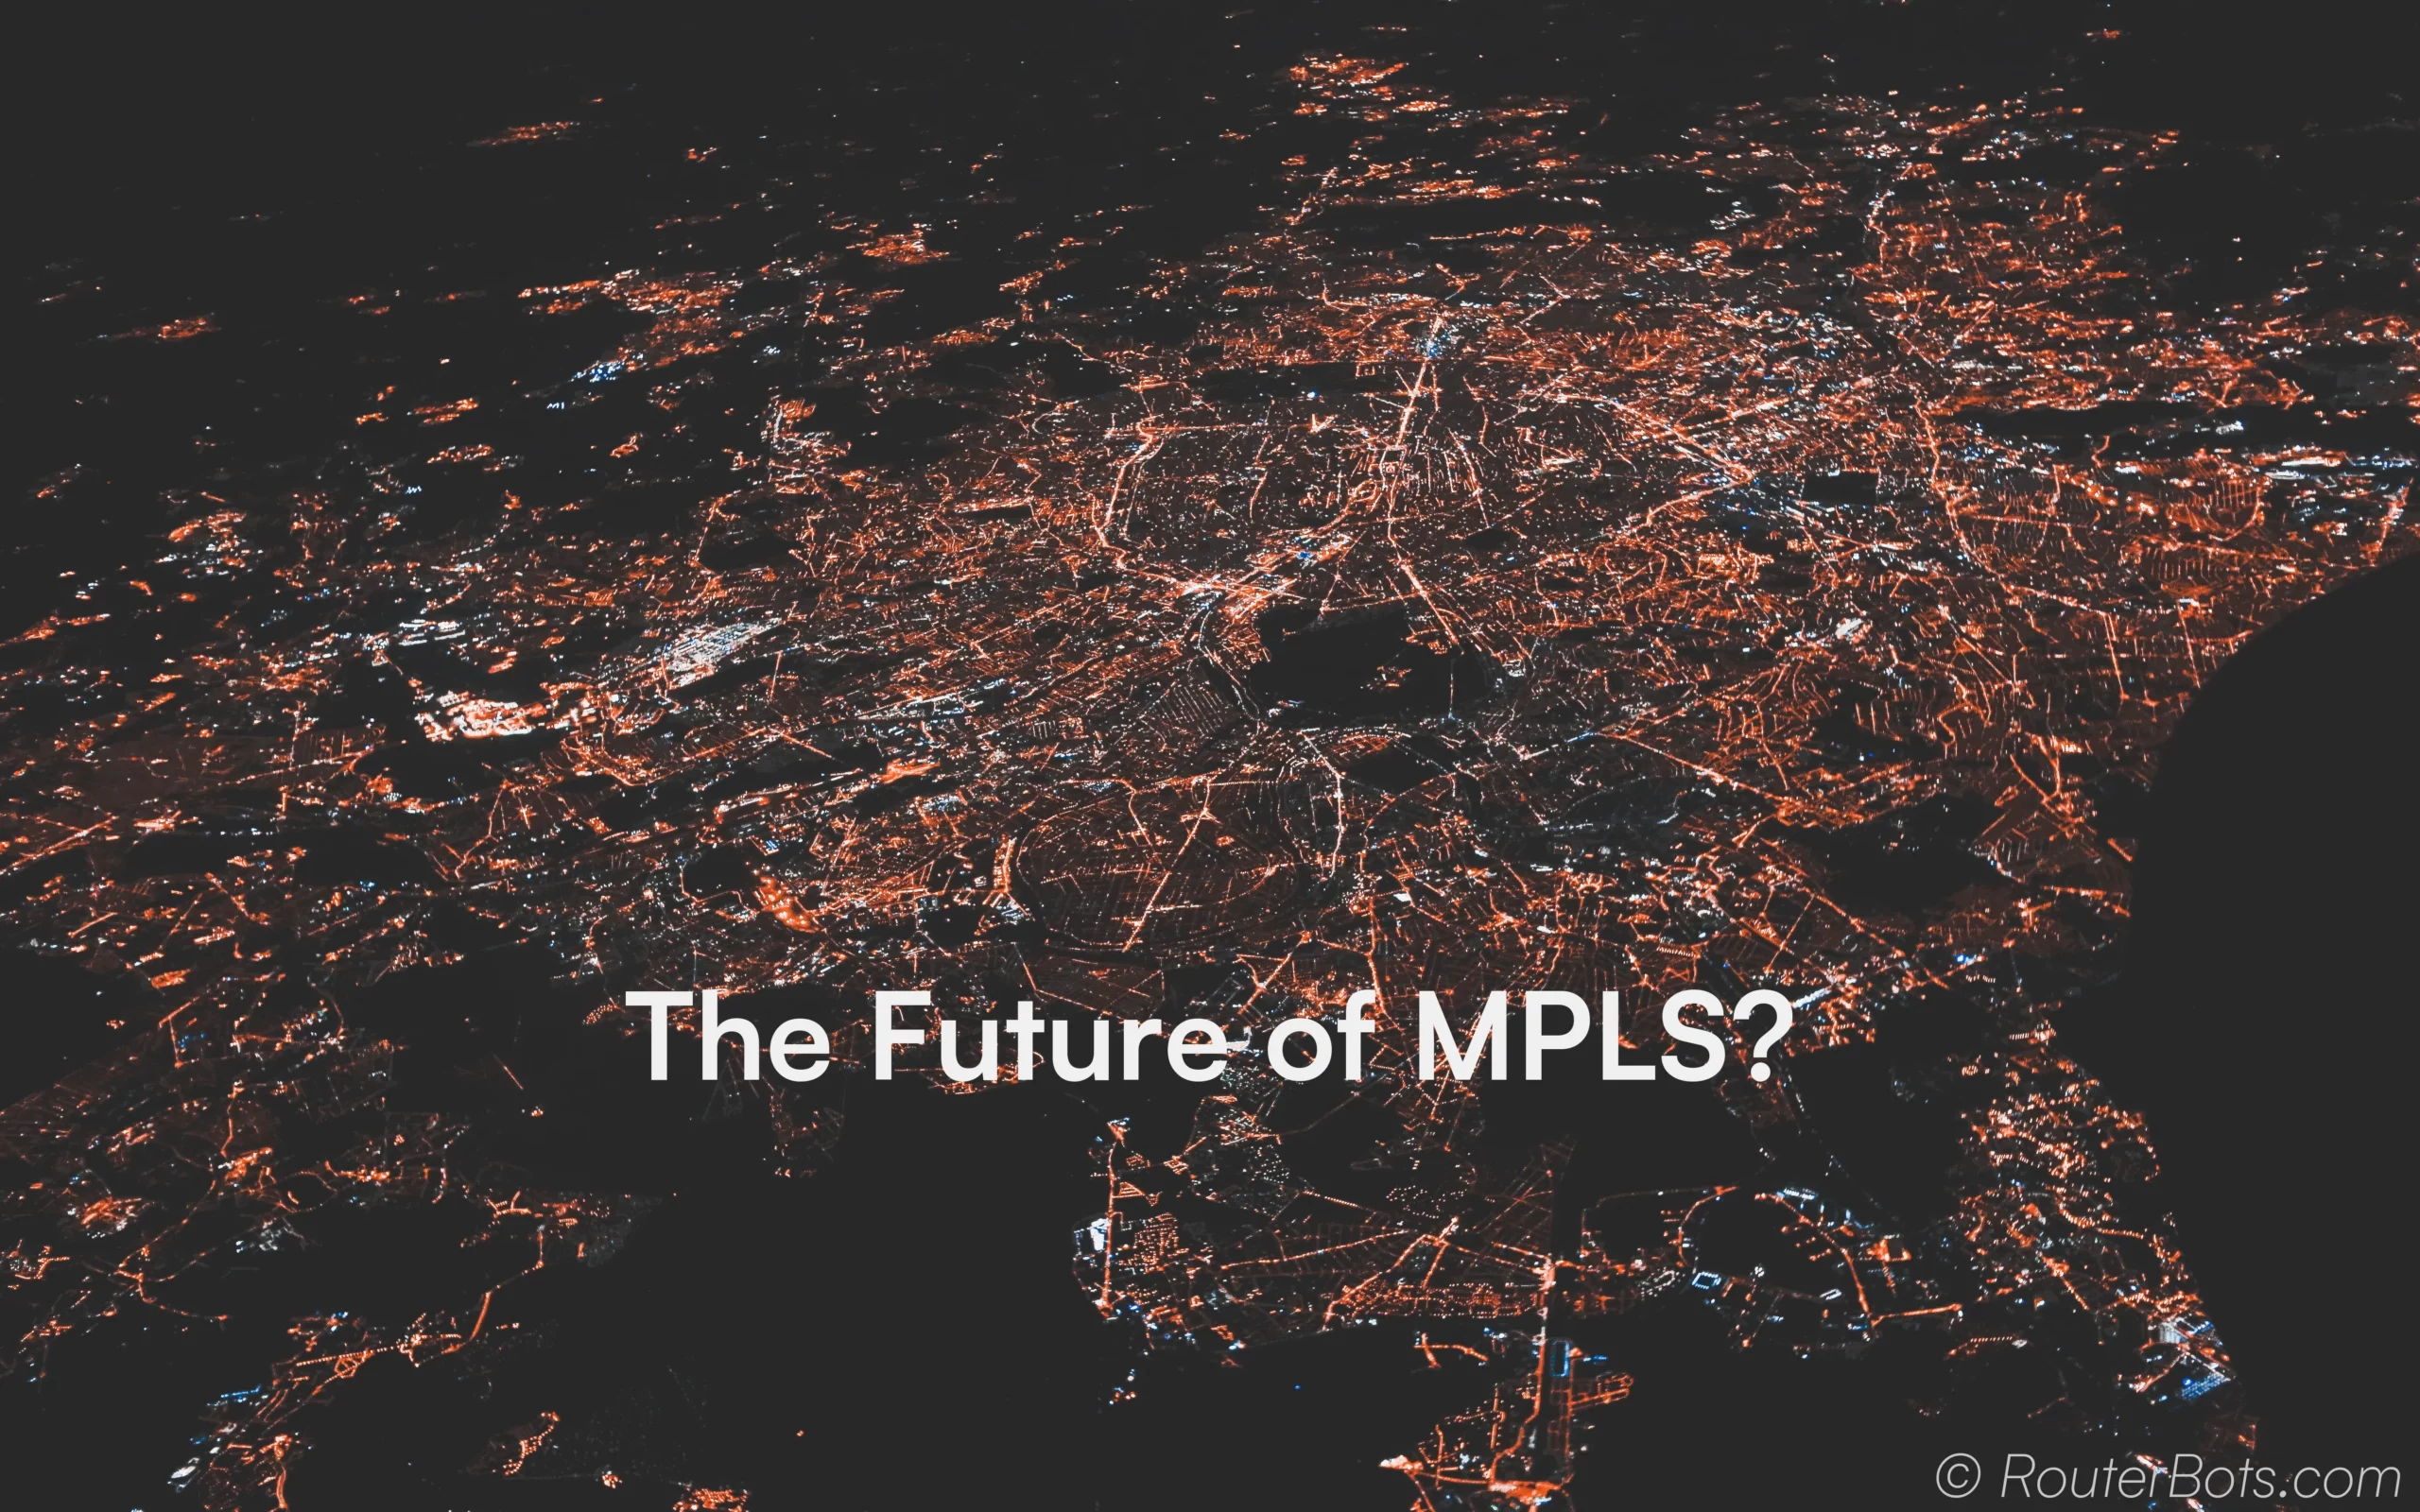 The Future of MPLS?